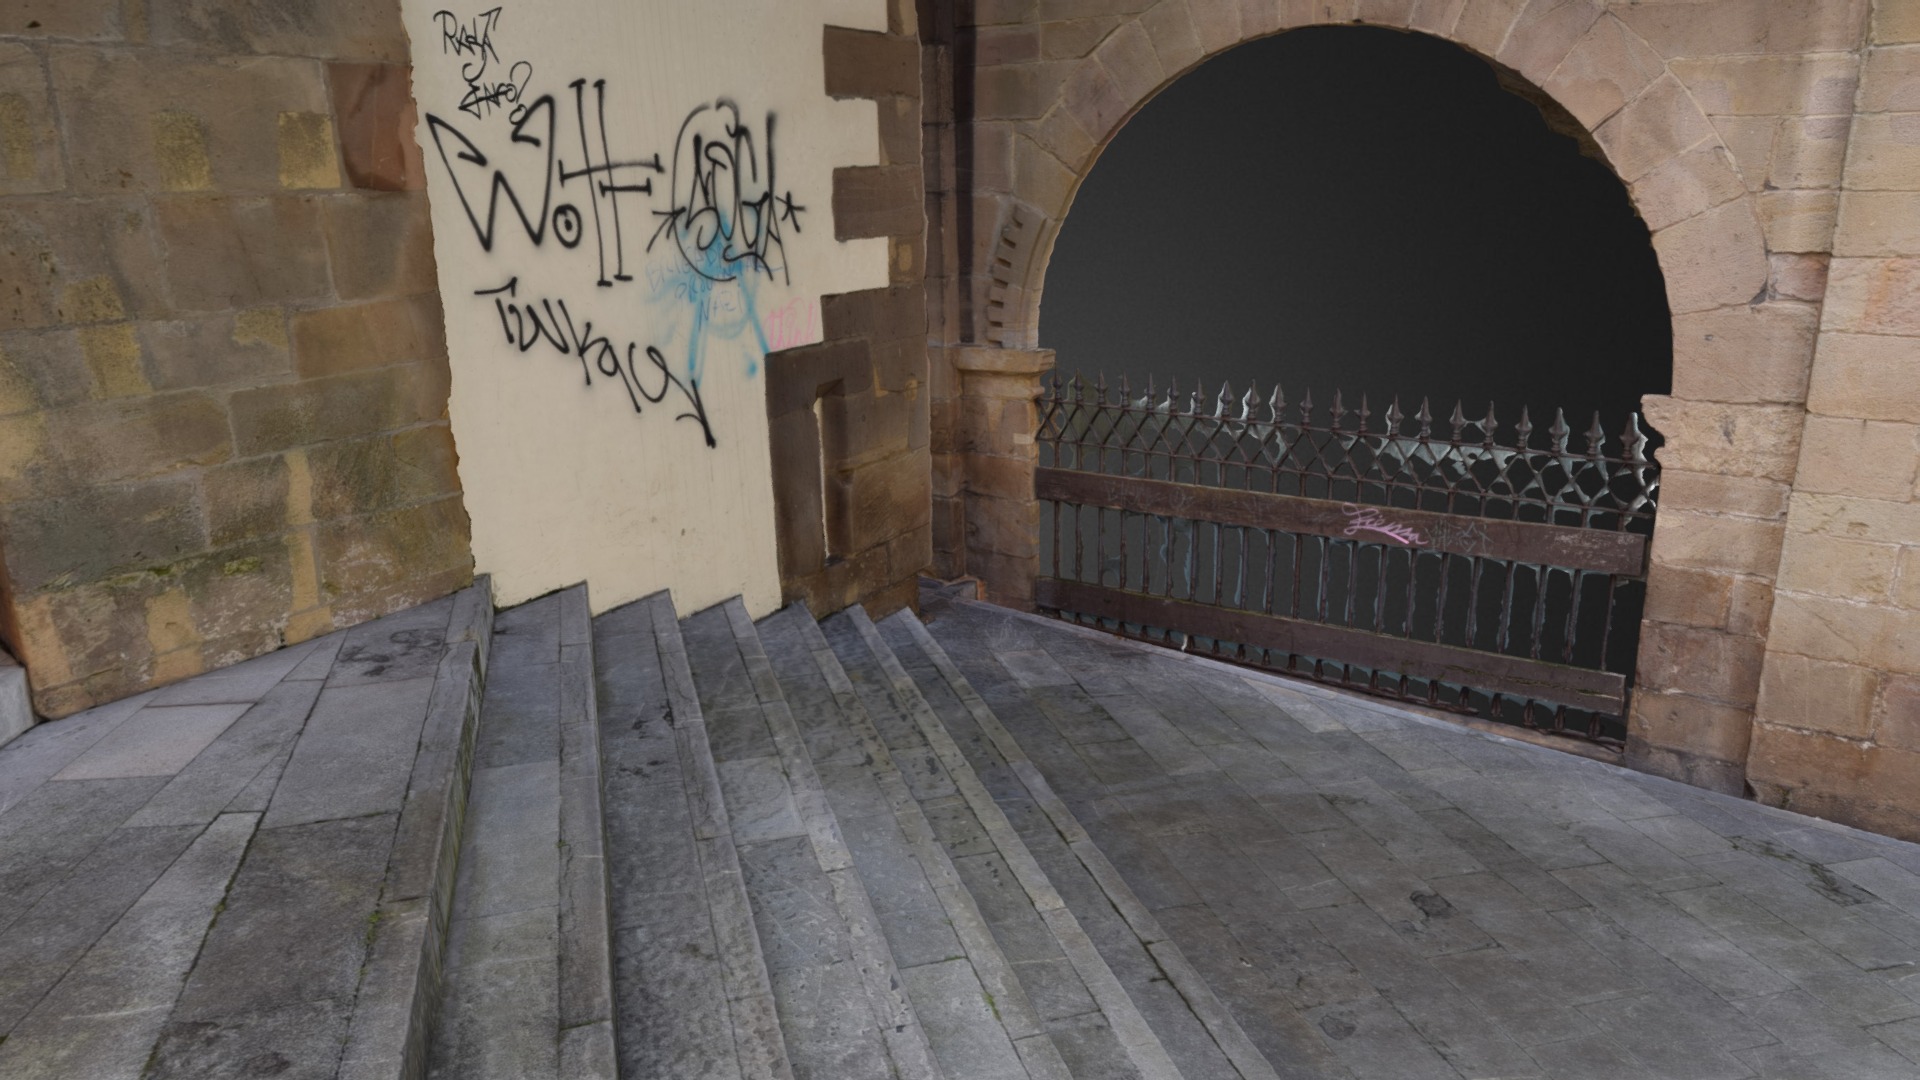 3D model Stairs and fence photogrammetry scan - This is a 3D model of the Stairs and fence photogrammetry scan. The 3D model is about a brick walkway with graffiti on it.